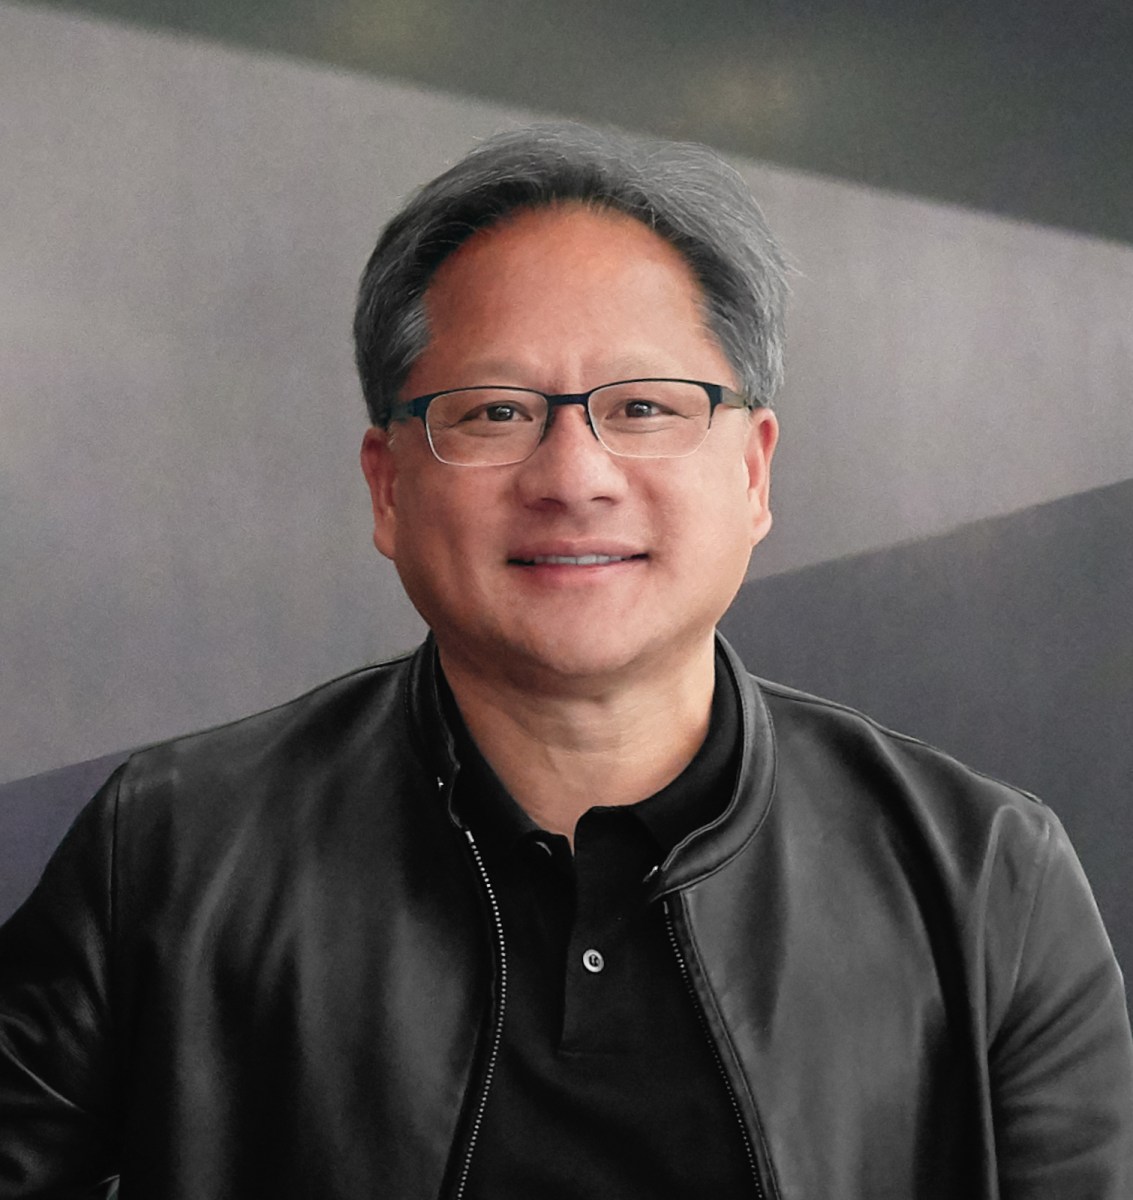 All the Nvidia news was announced by Jensen Huang at Computex